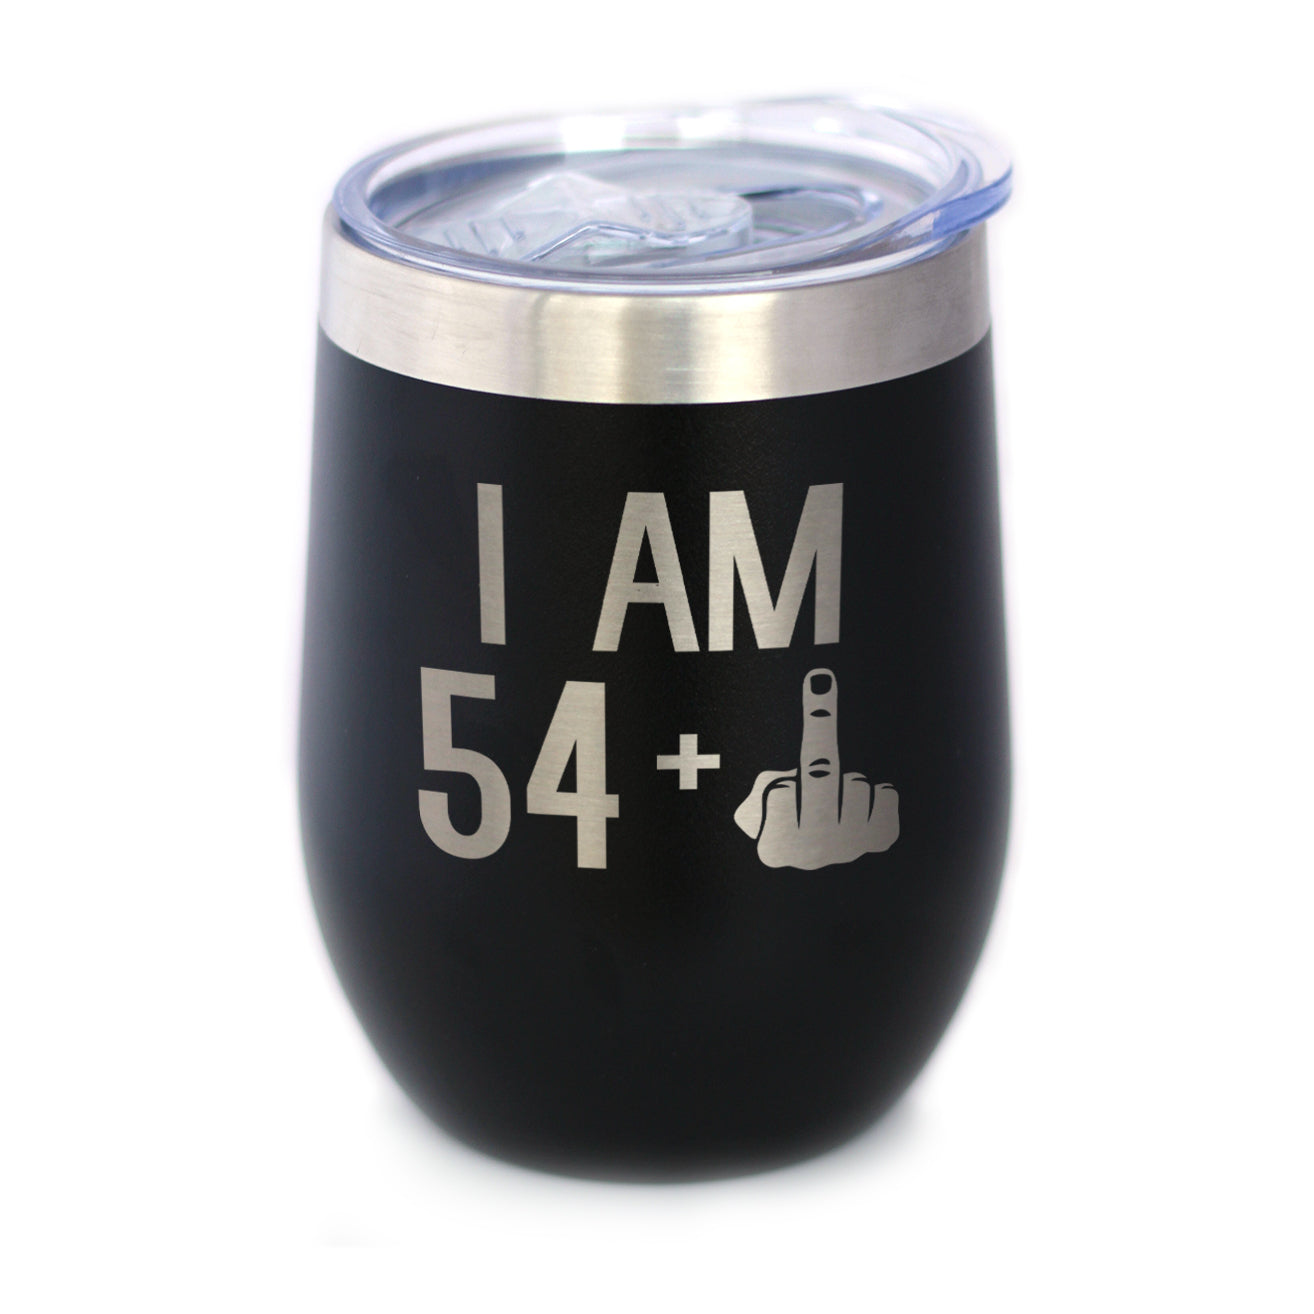 Coffee Or Middle Fingers - Funny Engraved Tumbler, Insulated Coffee Mug,  Funny Gift Cup